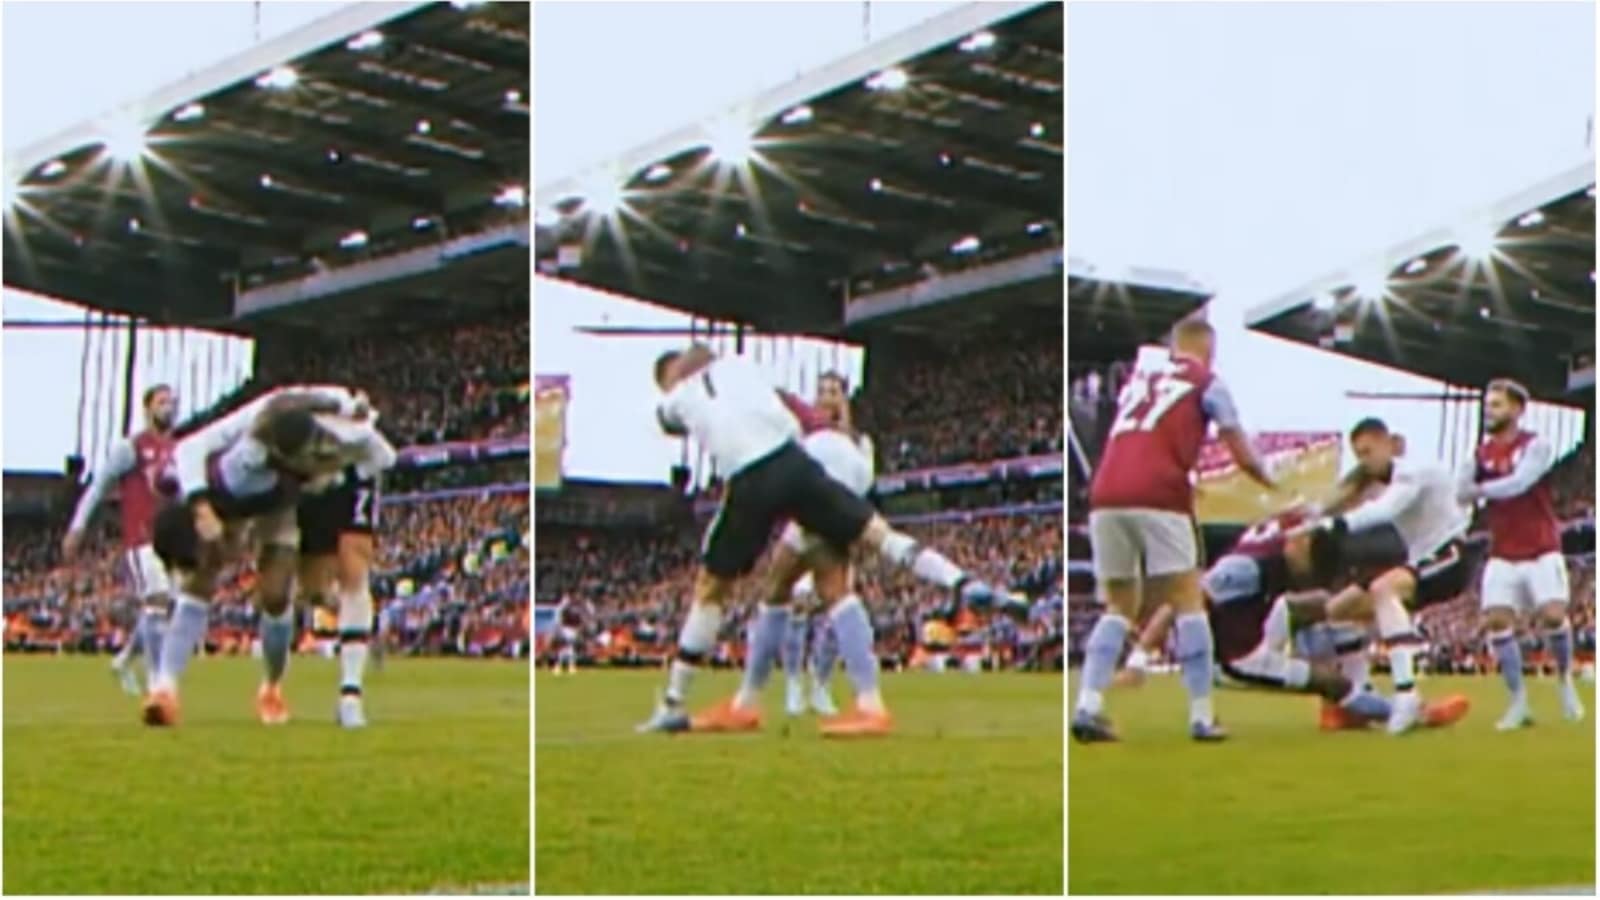 Watch: Ronaldo, Tyrone Mings get into ugly WWE-esque fight in Aston Villa vs Man Utd match, players forced to intervene